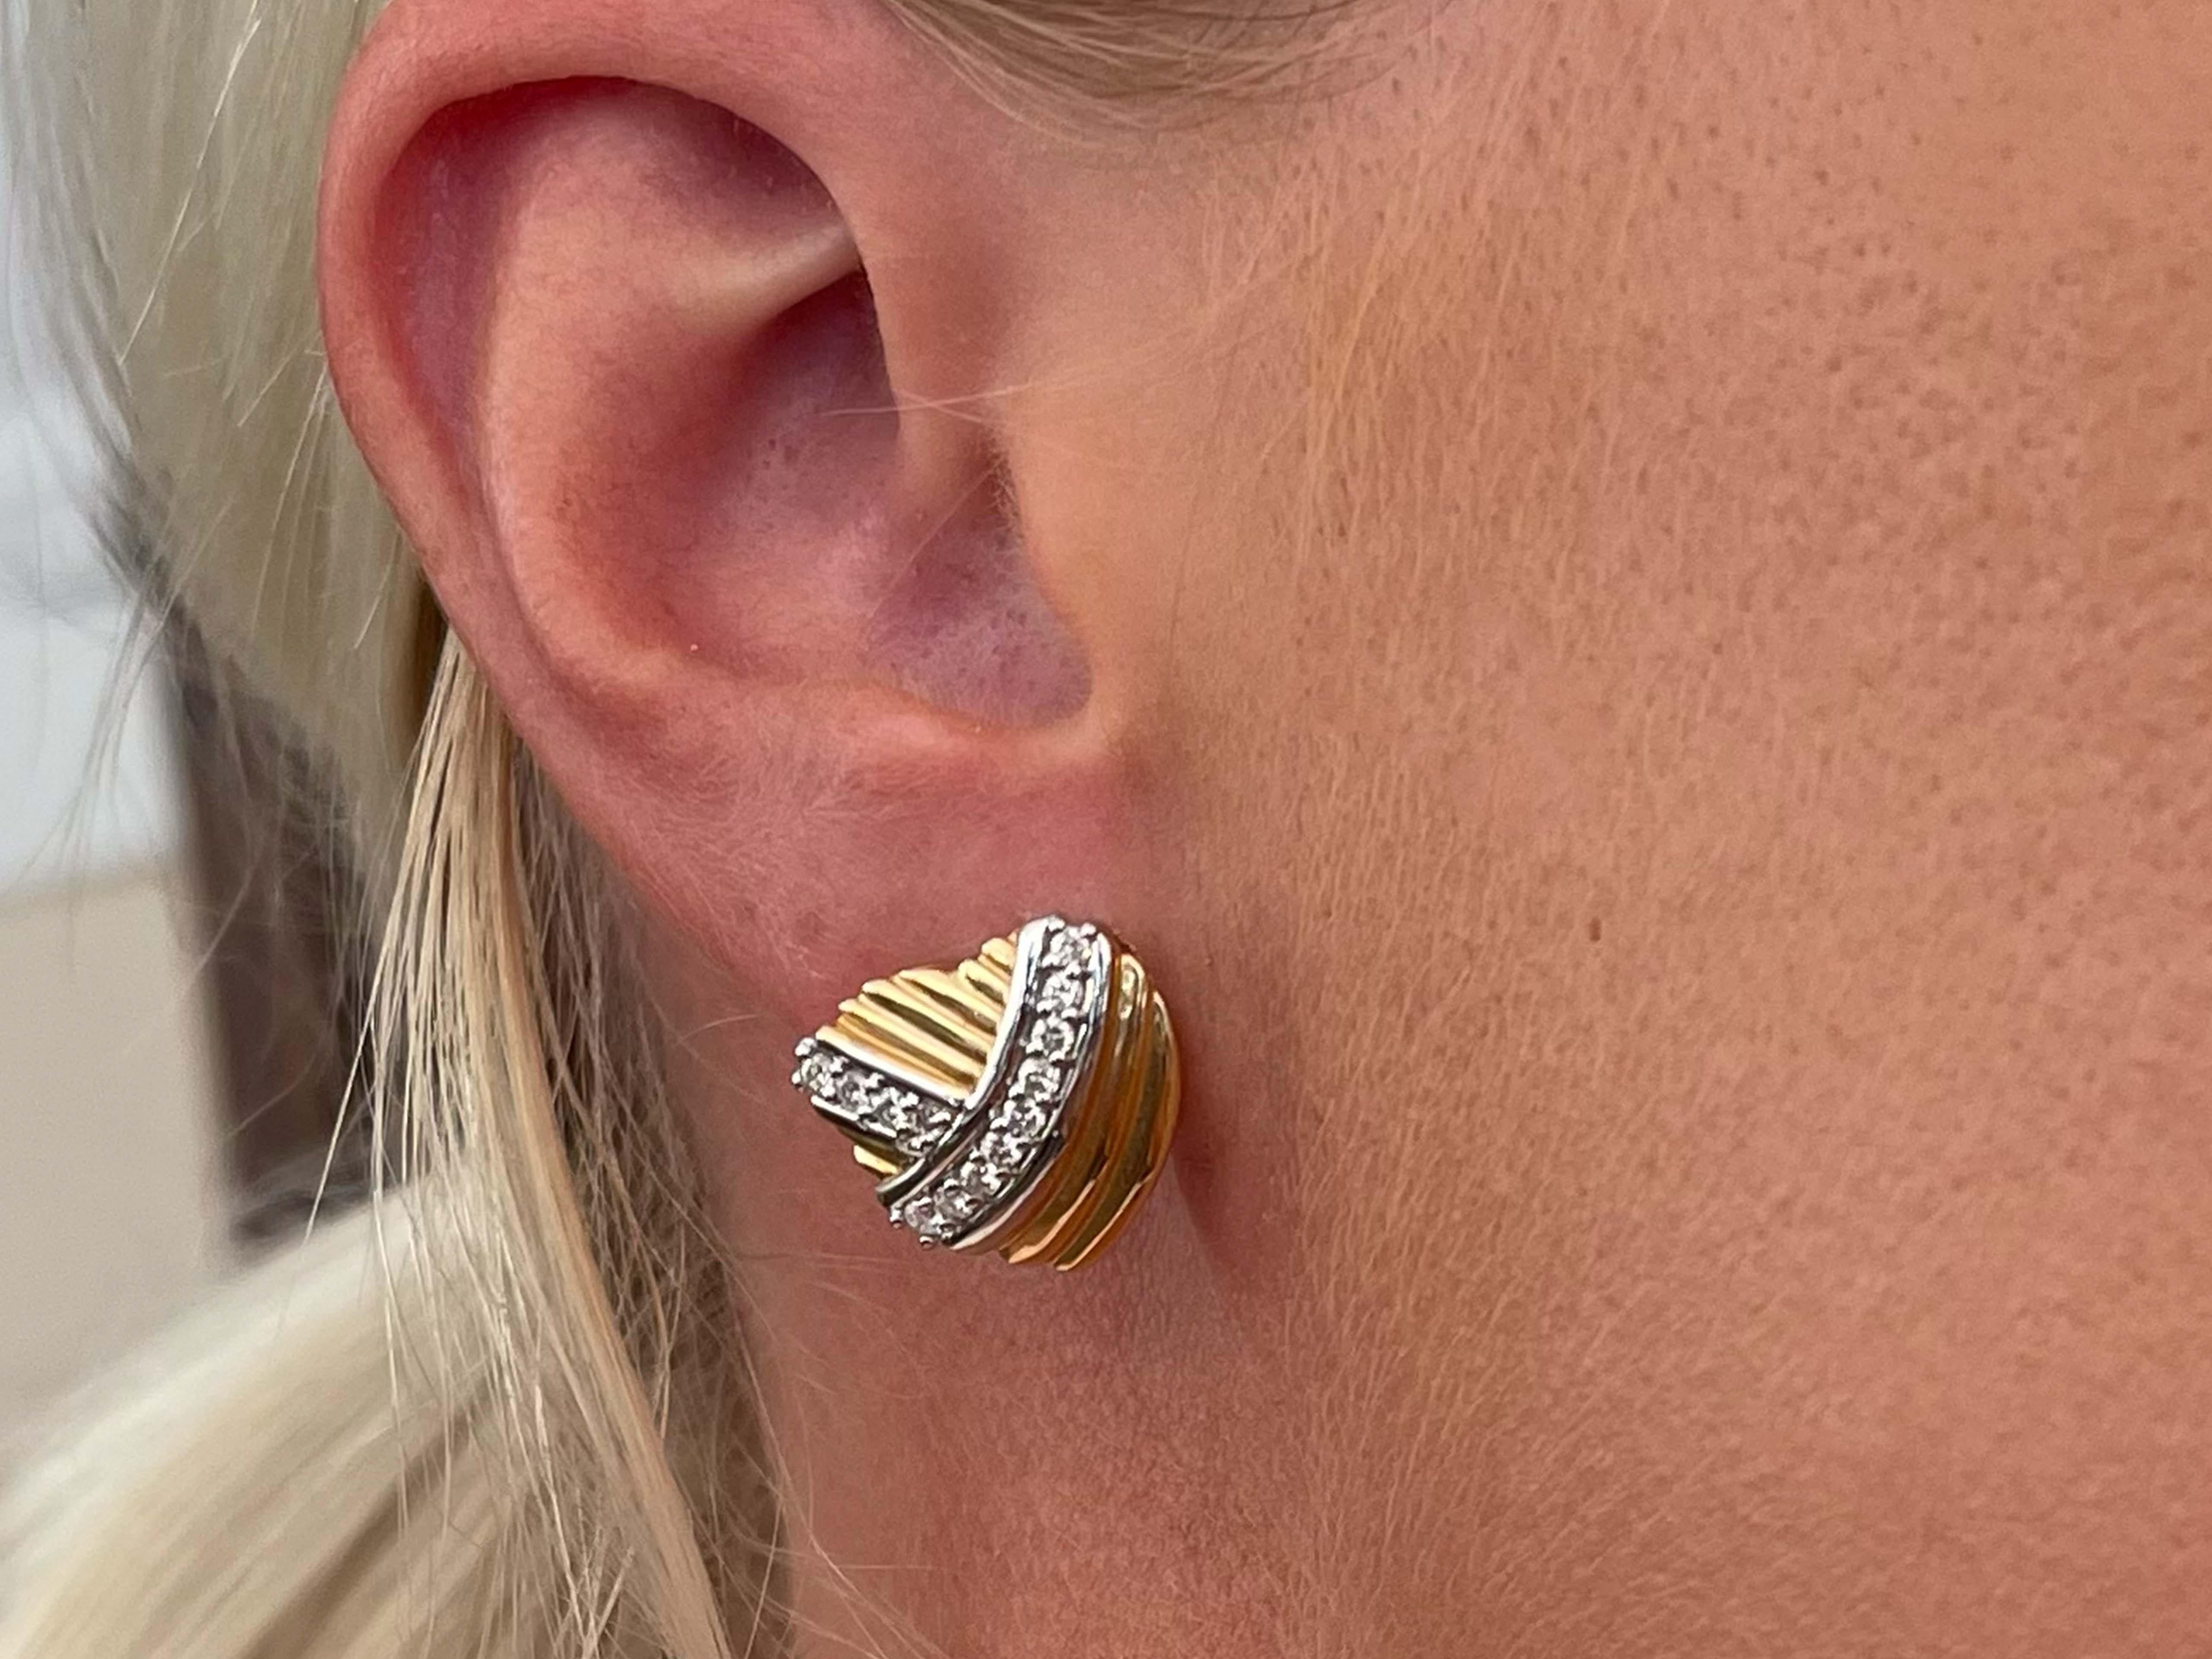 Earrings Specifications:

Metal: 14k White and Yellow Gold

Earring Diameter: 15.5 mm

Total Weight: 7.4 Grams

Diamonds: 26

Setting: Prong

Diamond Color: G

Diamond Clarity: VS

Diamond Carat Weight: 0.50 carats

Condition: Preowned

